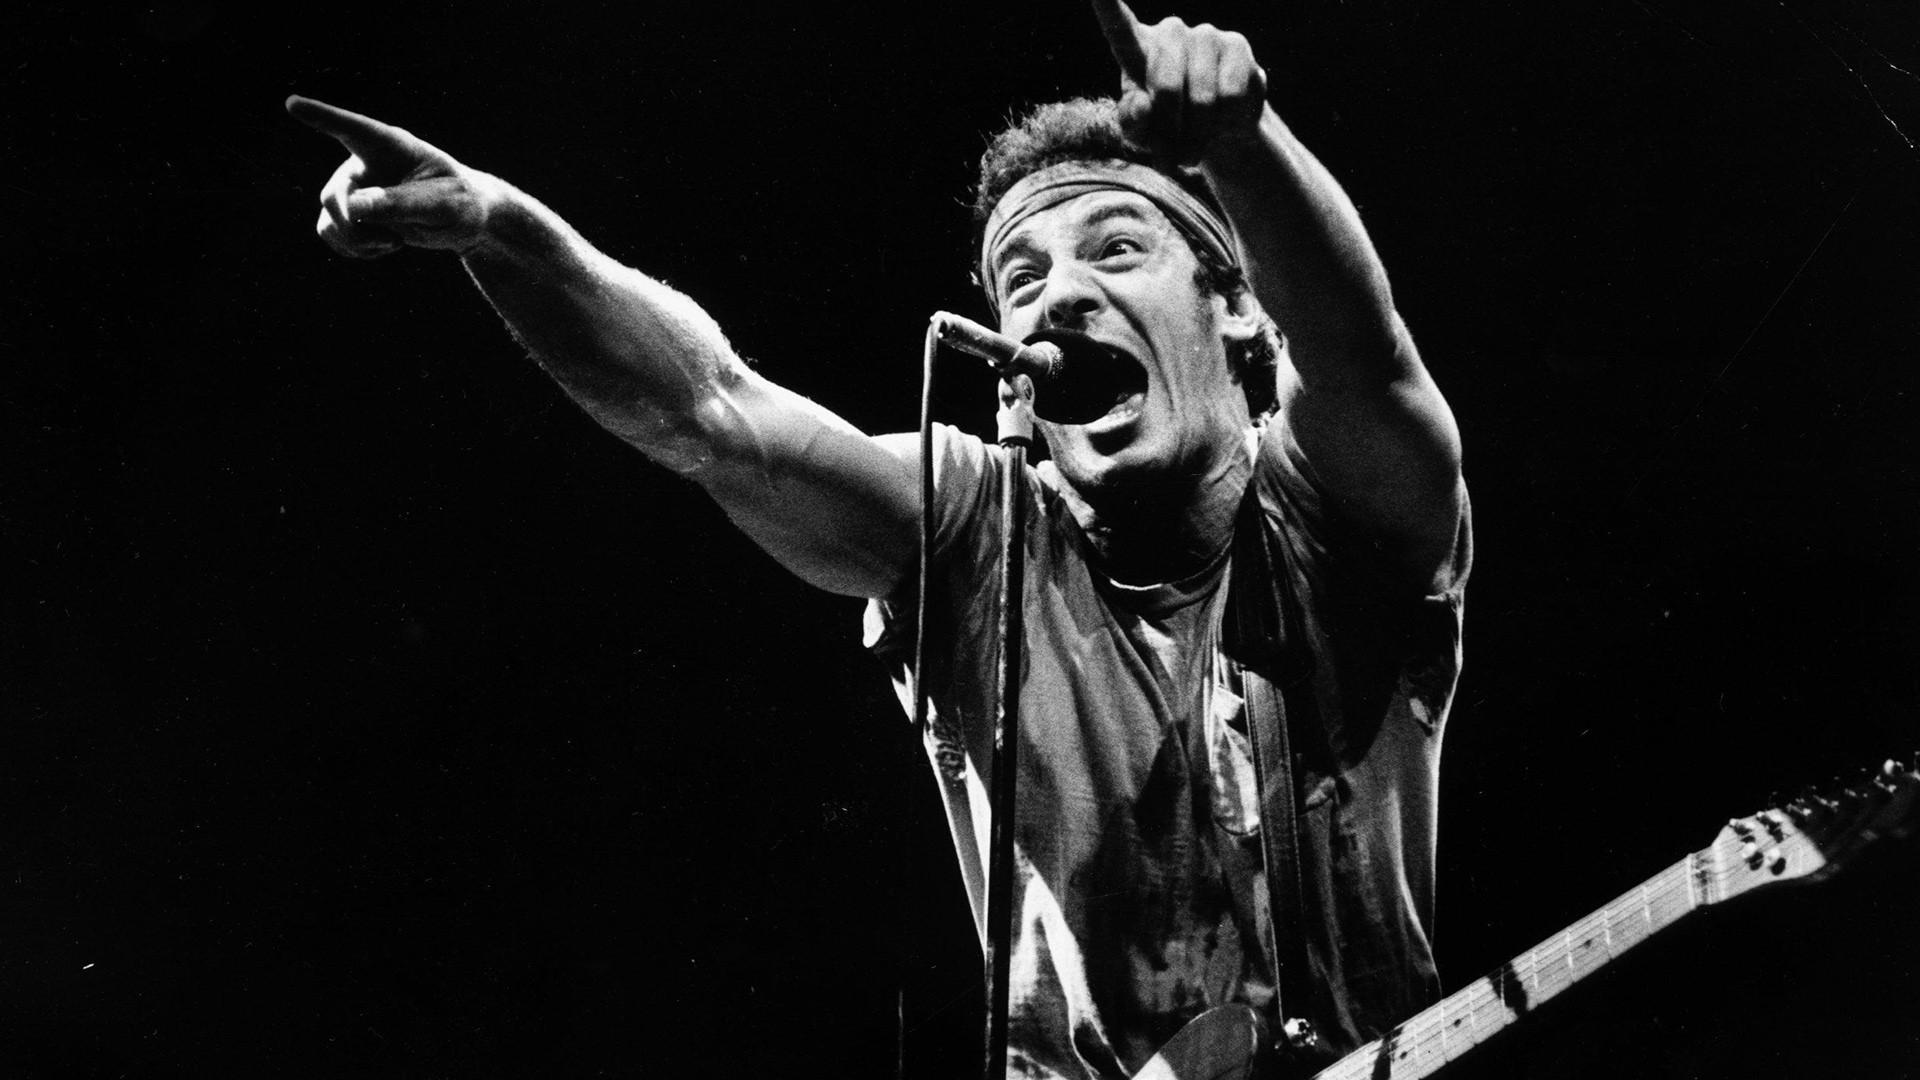 Desktop Screen Of Bruce Springsteen Wallpaper By Imoti At 22 02